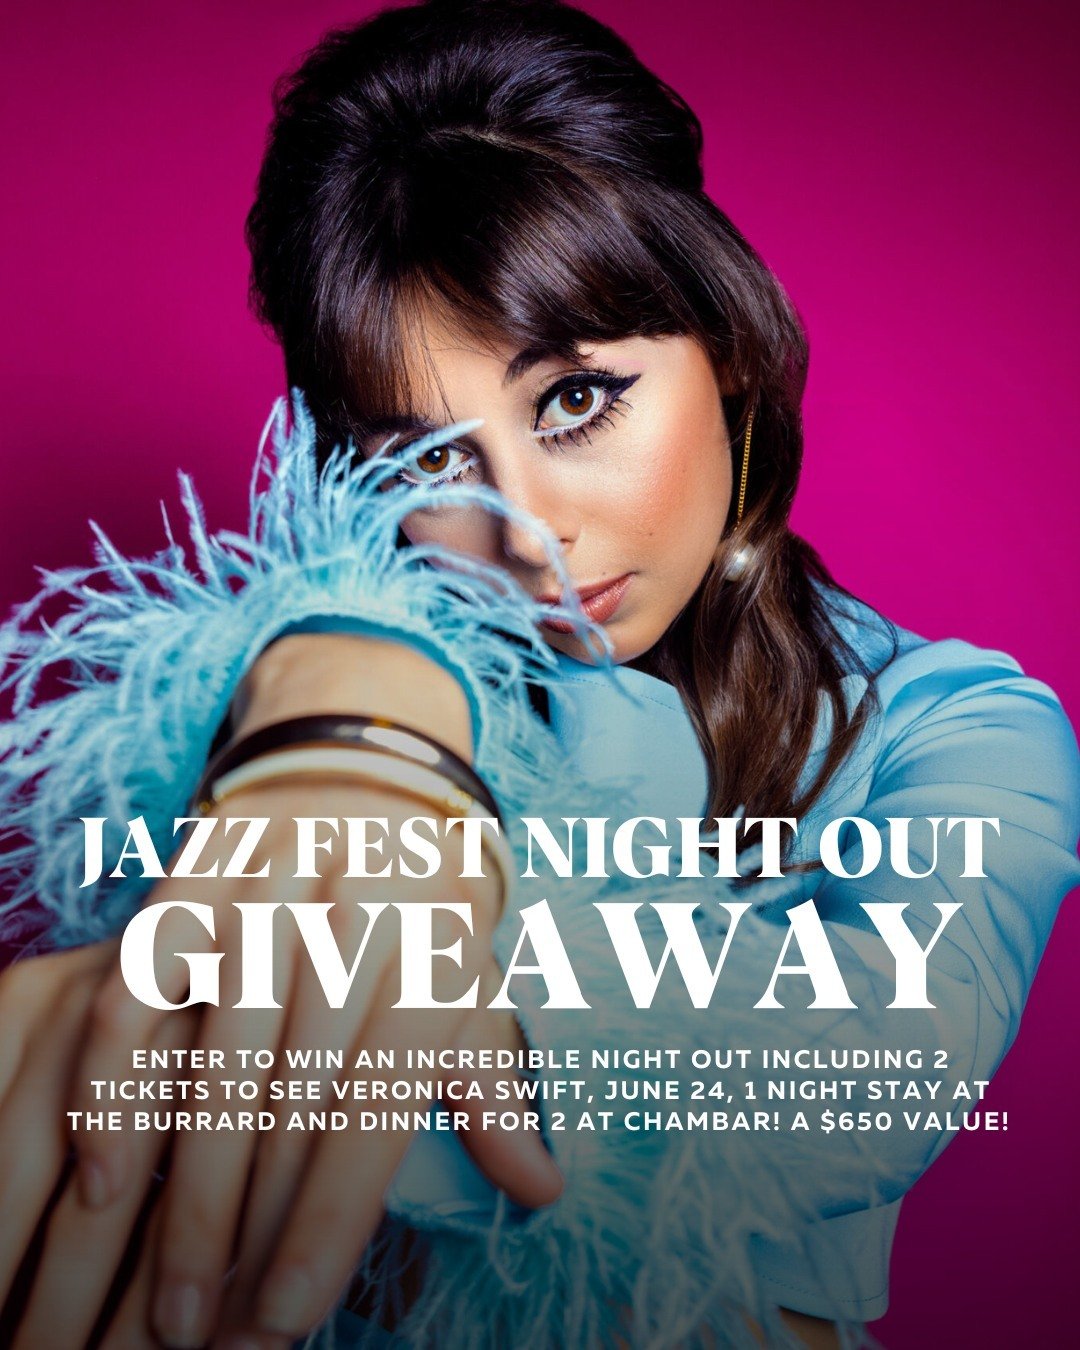 Win a Night Out at the Vancouver International Jazz Festival! ⁠
⁠
The 39th Annual Vancouver International Jazz Festival returns, June 21 - 30! With 150 performances and 50 free events, this is Vancouver's summer kick-off. ⁠
⁠
Enter to win an incredib